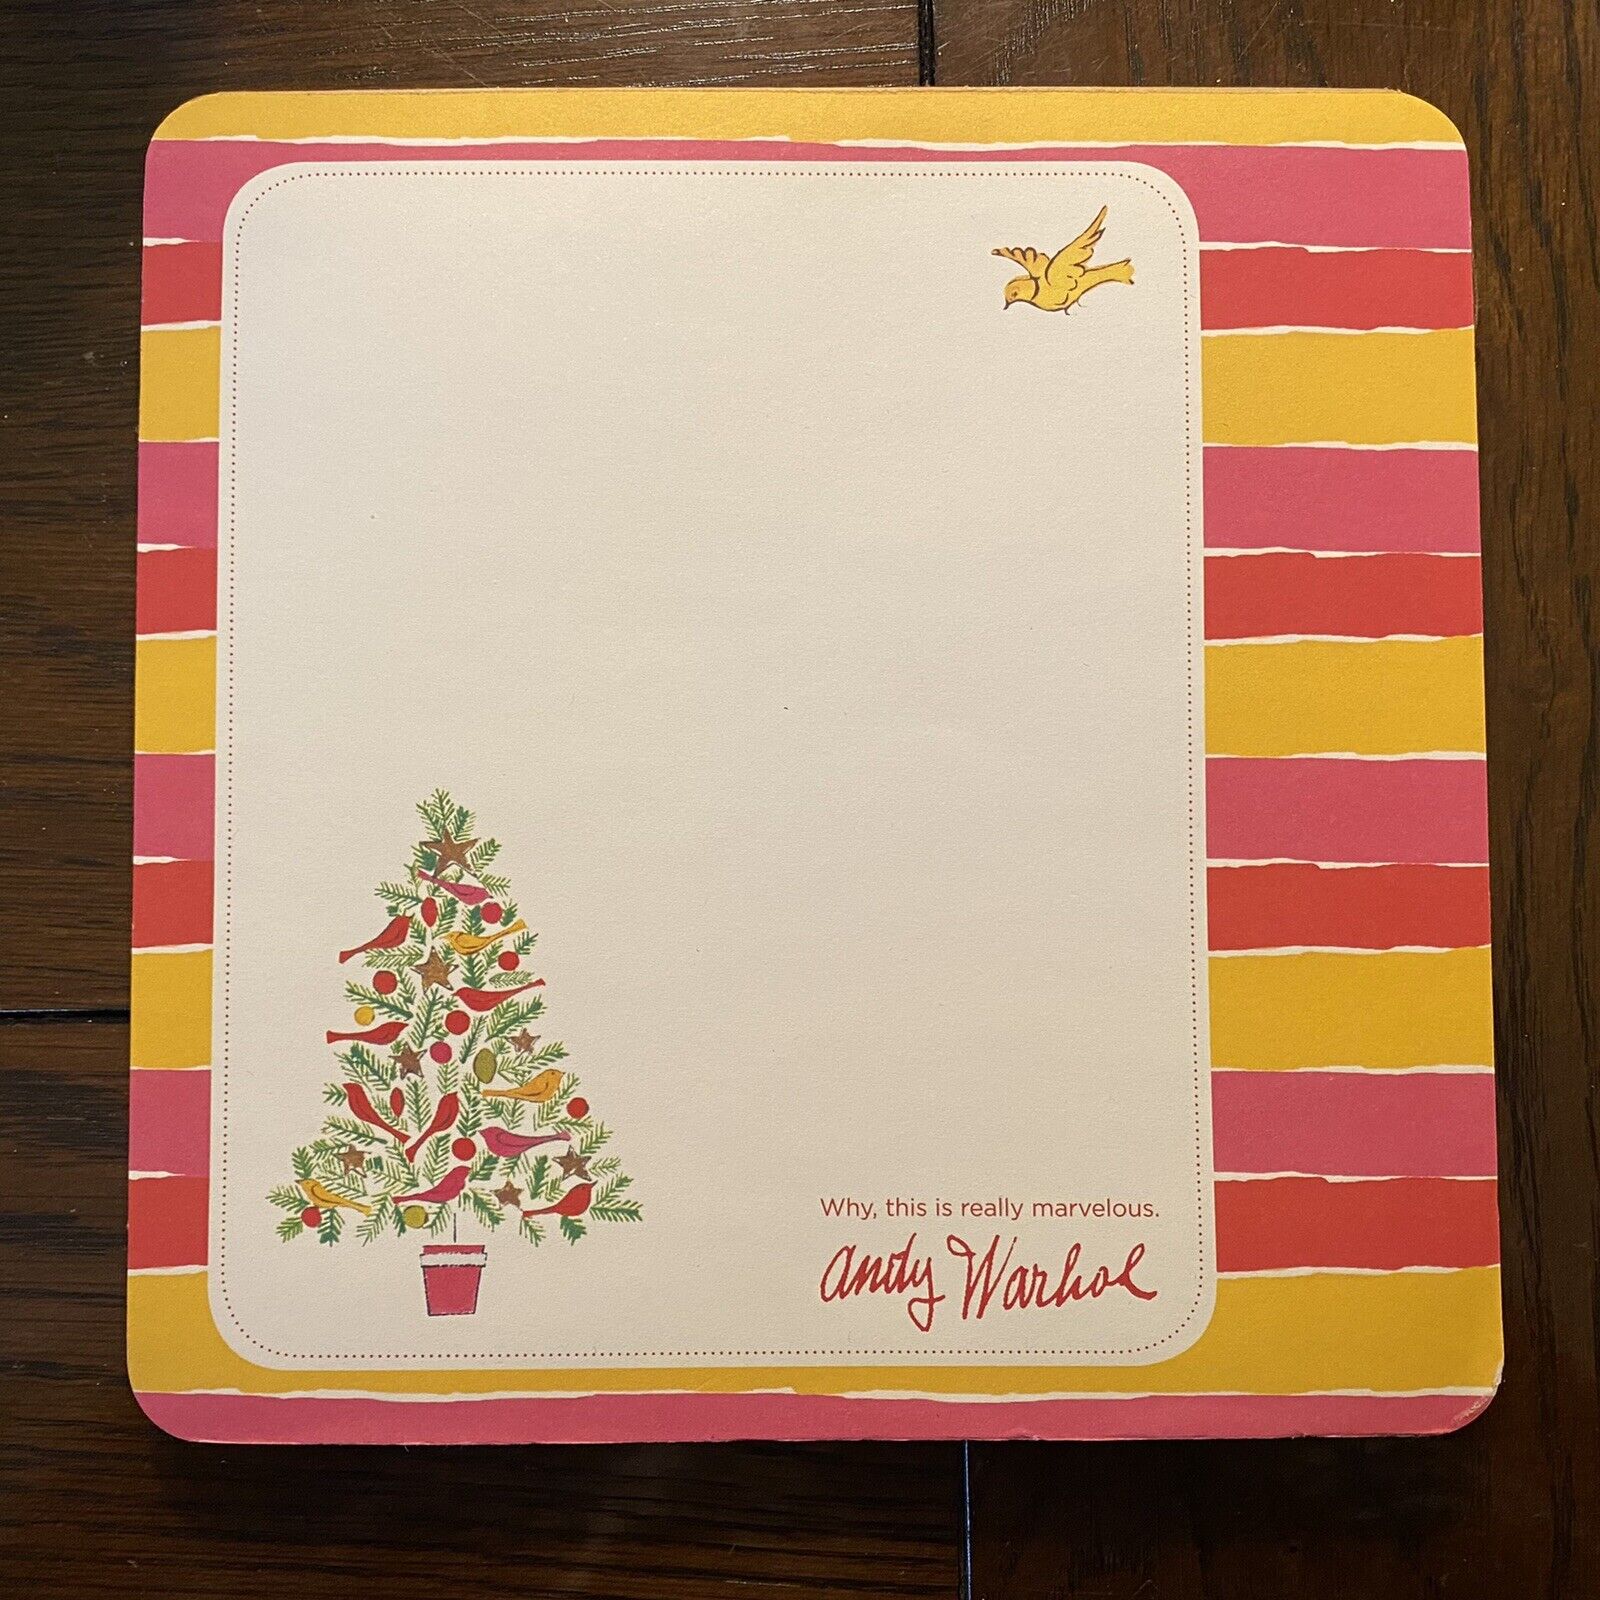 New Andy Warhol Holiday Ornaments Memo Pad Mousepad Why this is really marvelous